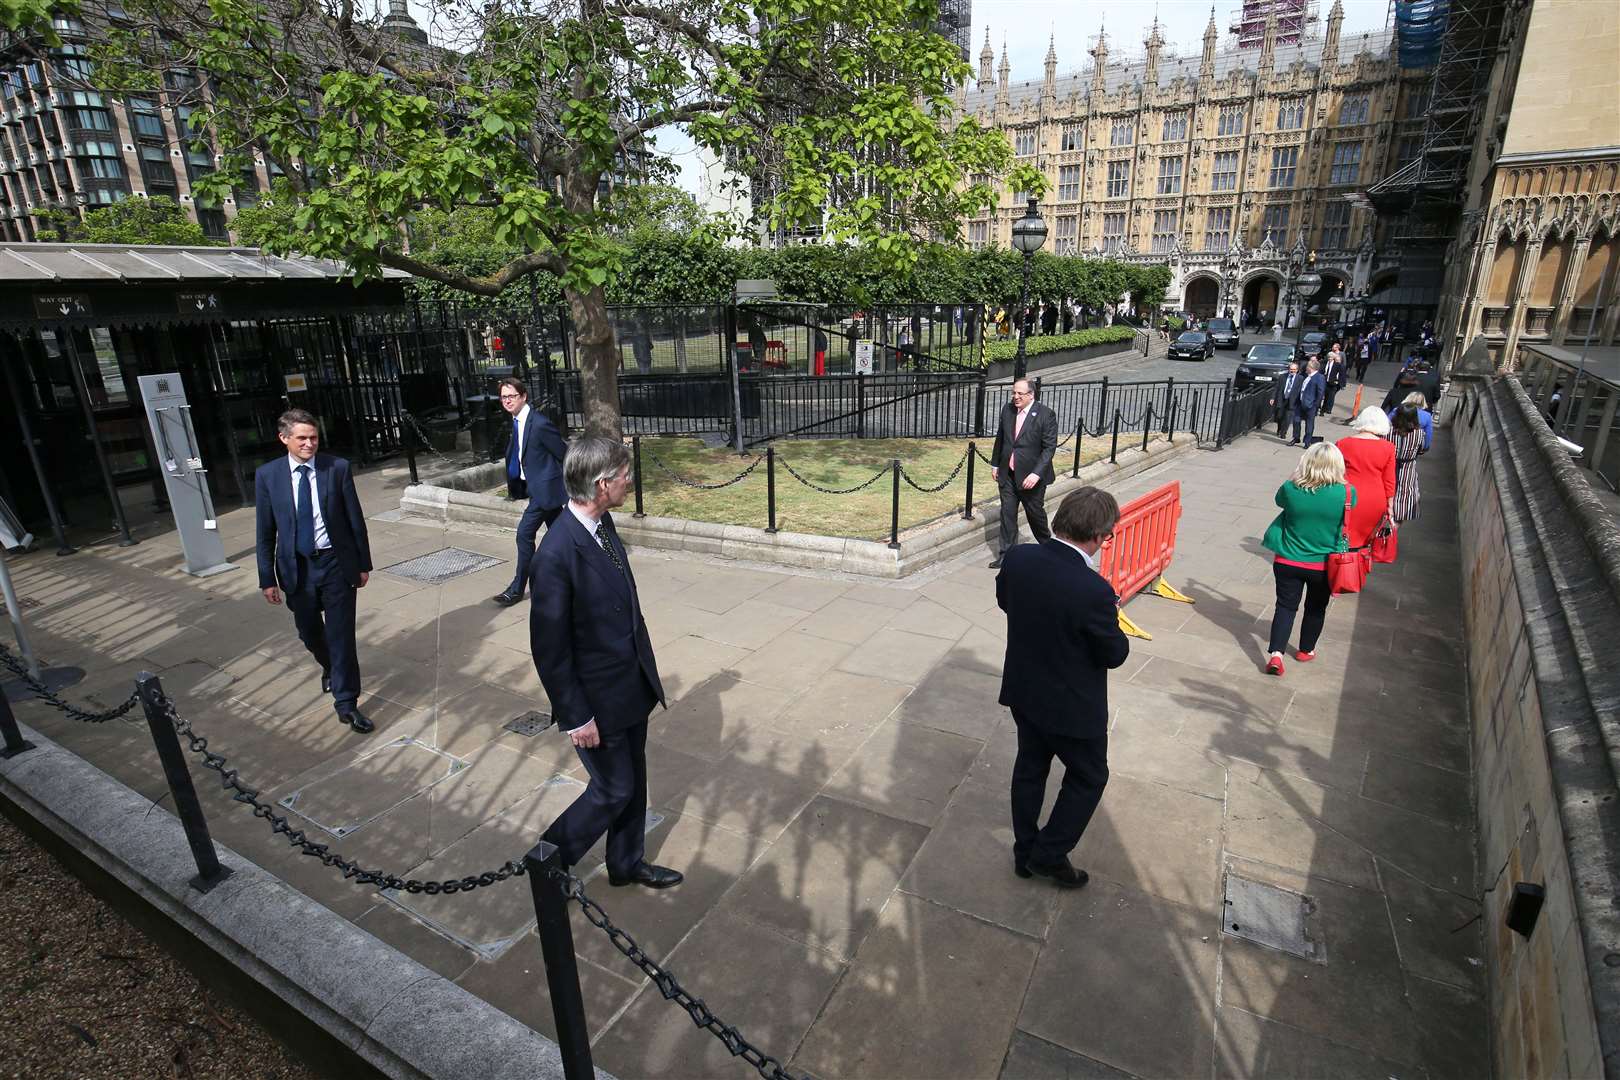 Members of Parliament queued outside the Houses of Commons earlier this week as they waited to vote on the future of proceedings (Jonathan Brady/PA)